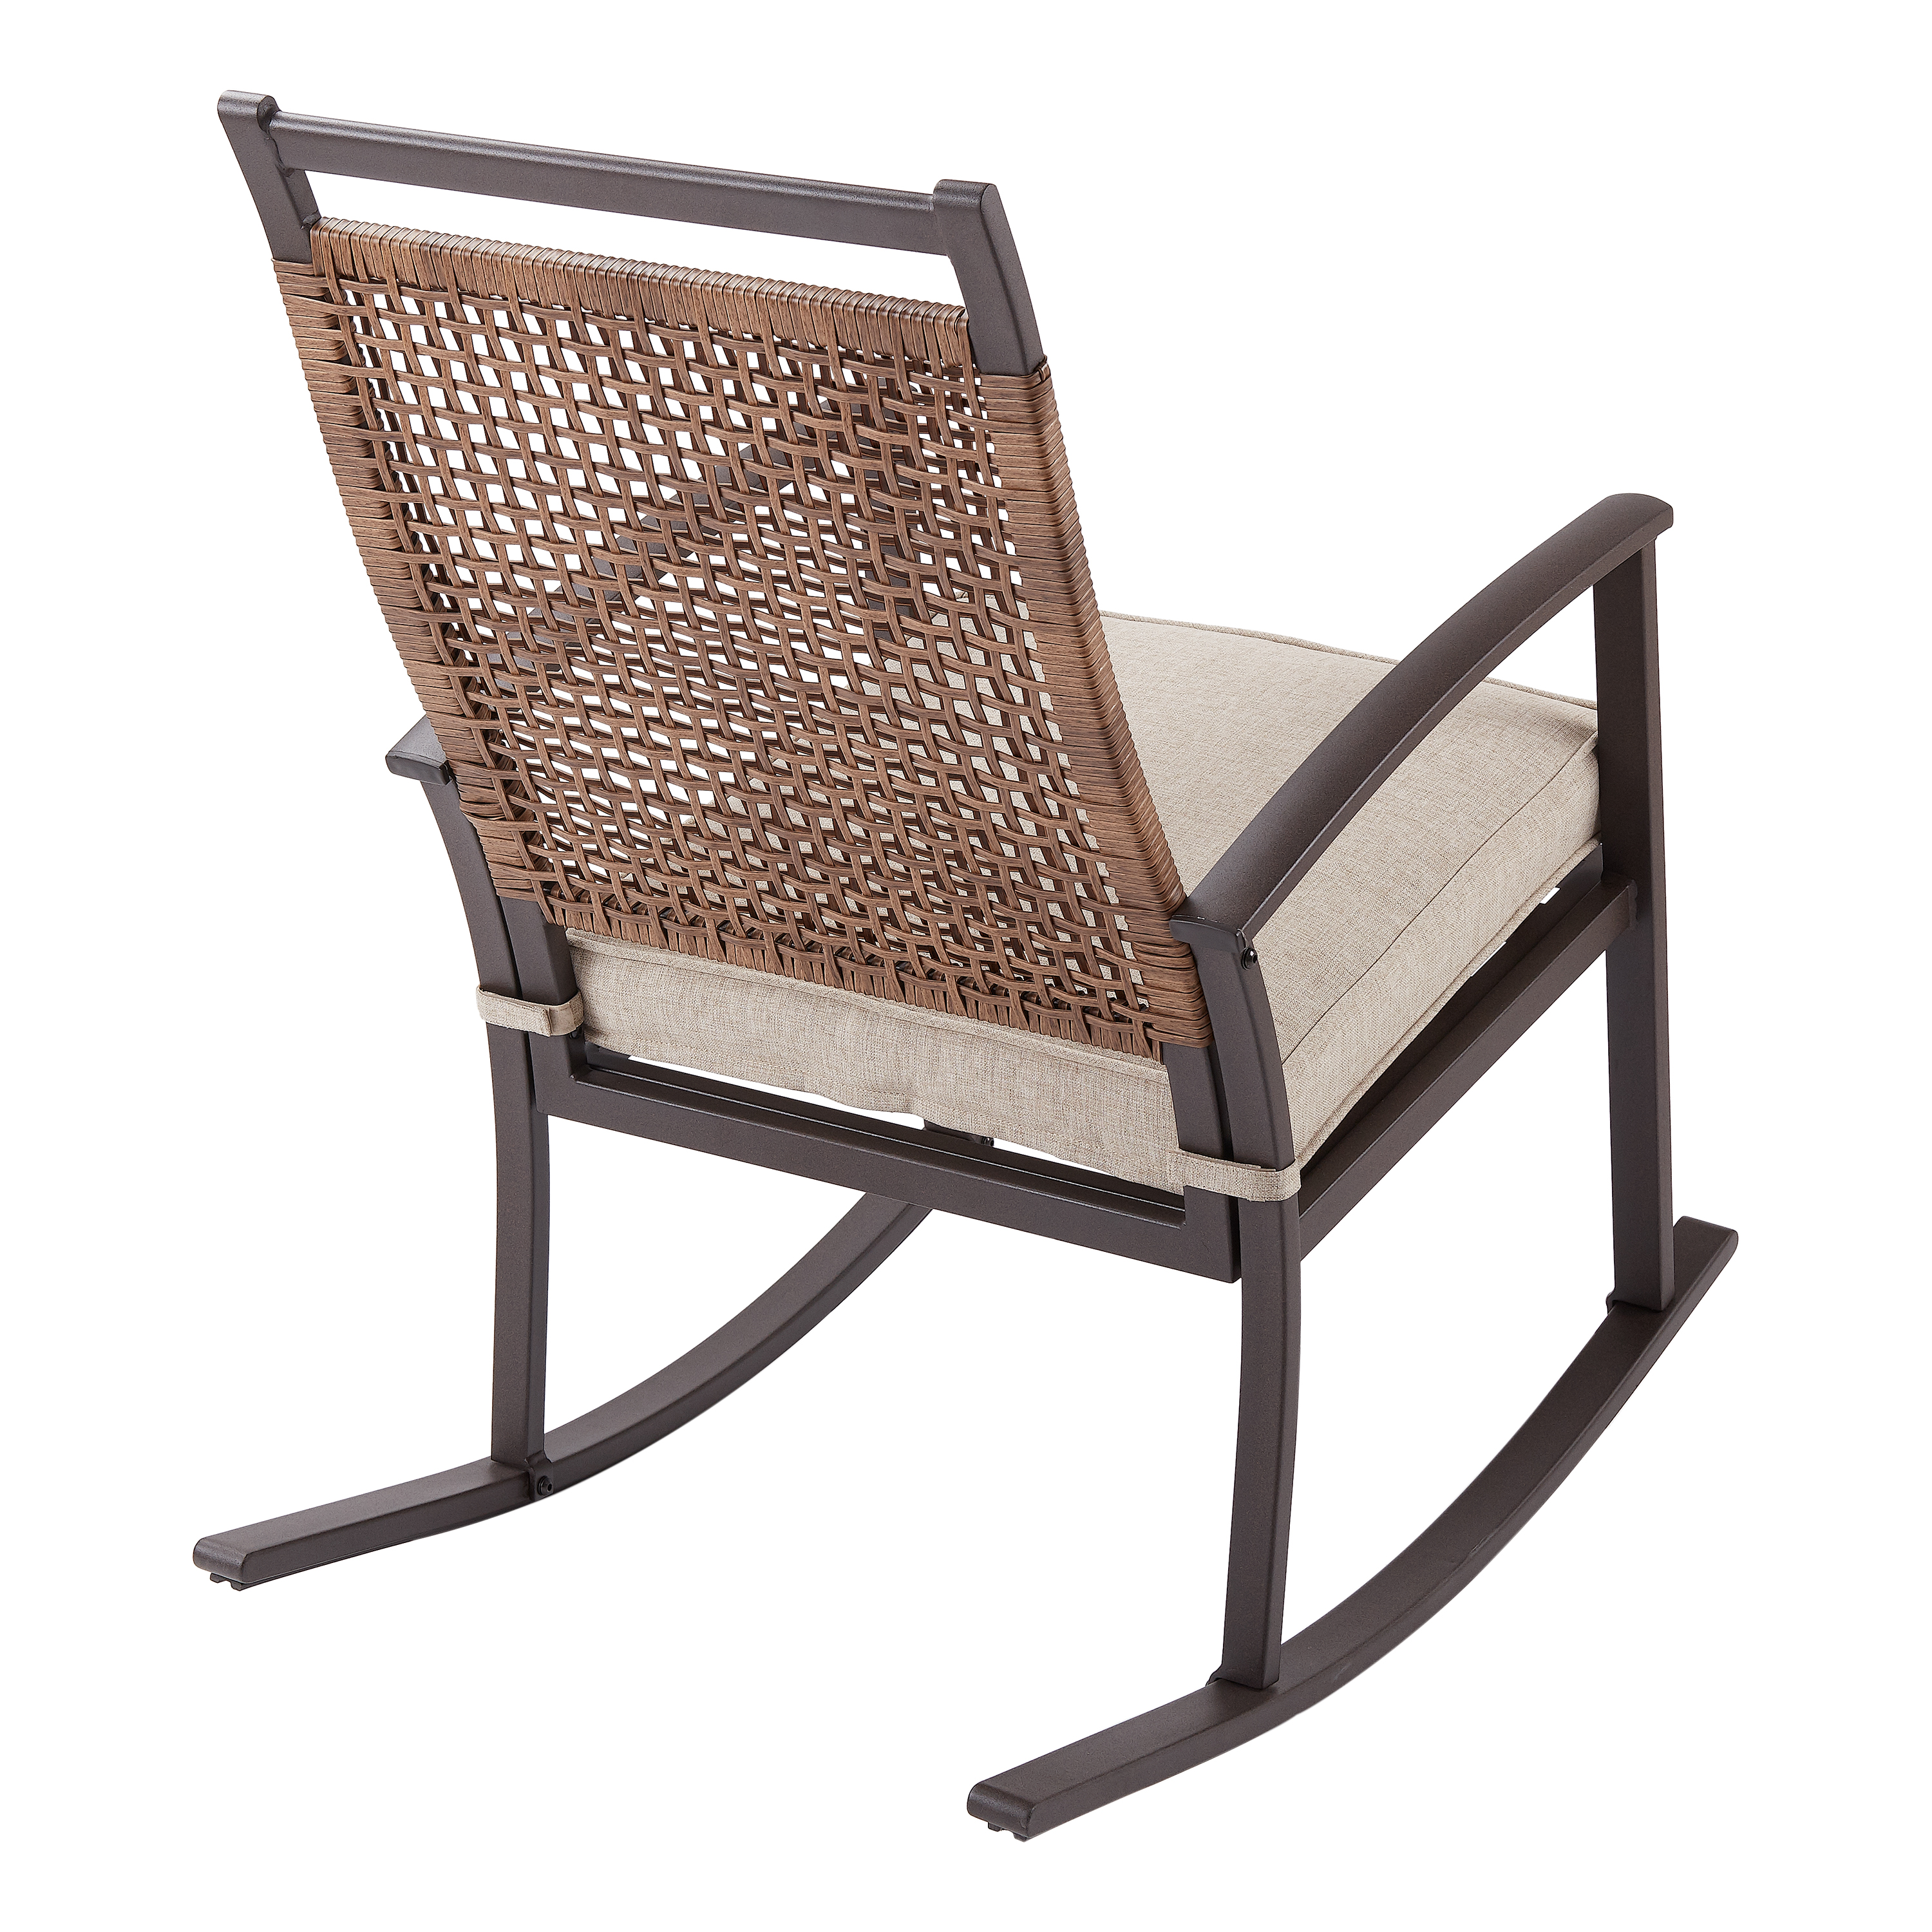 Better Homes & Gardens Heritage Outdoor Wicker Rocking Chair with Beige Cushion - image 3 of 4